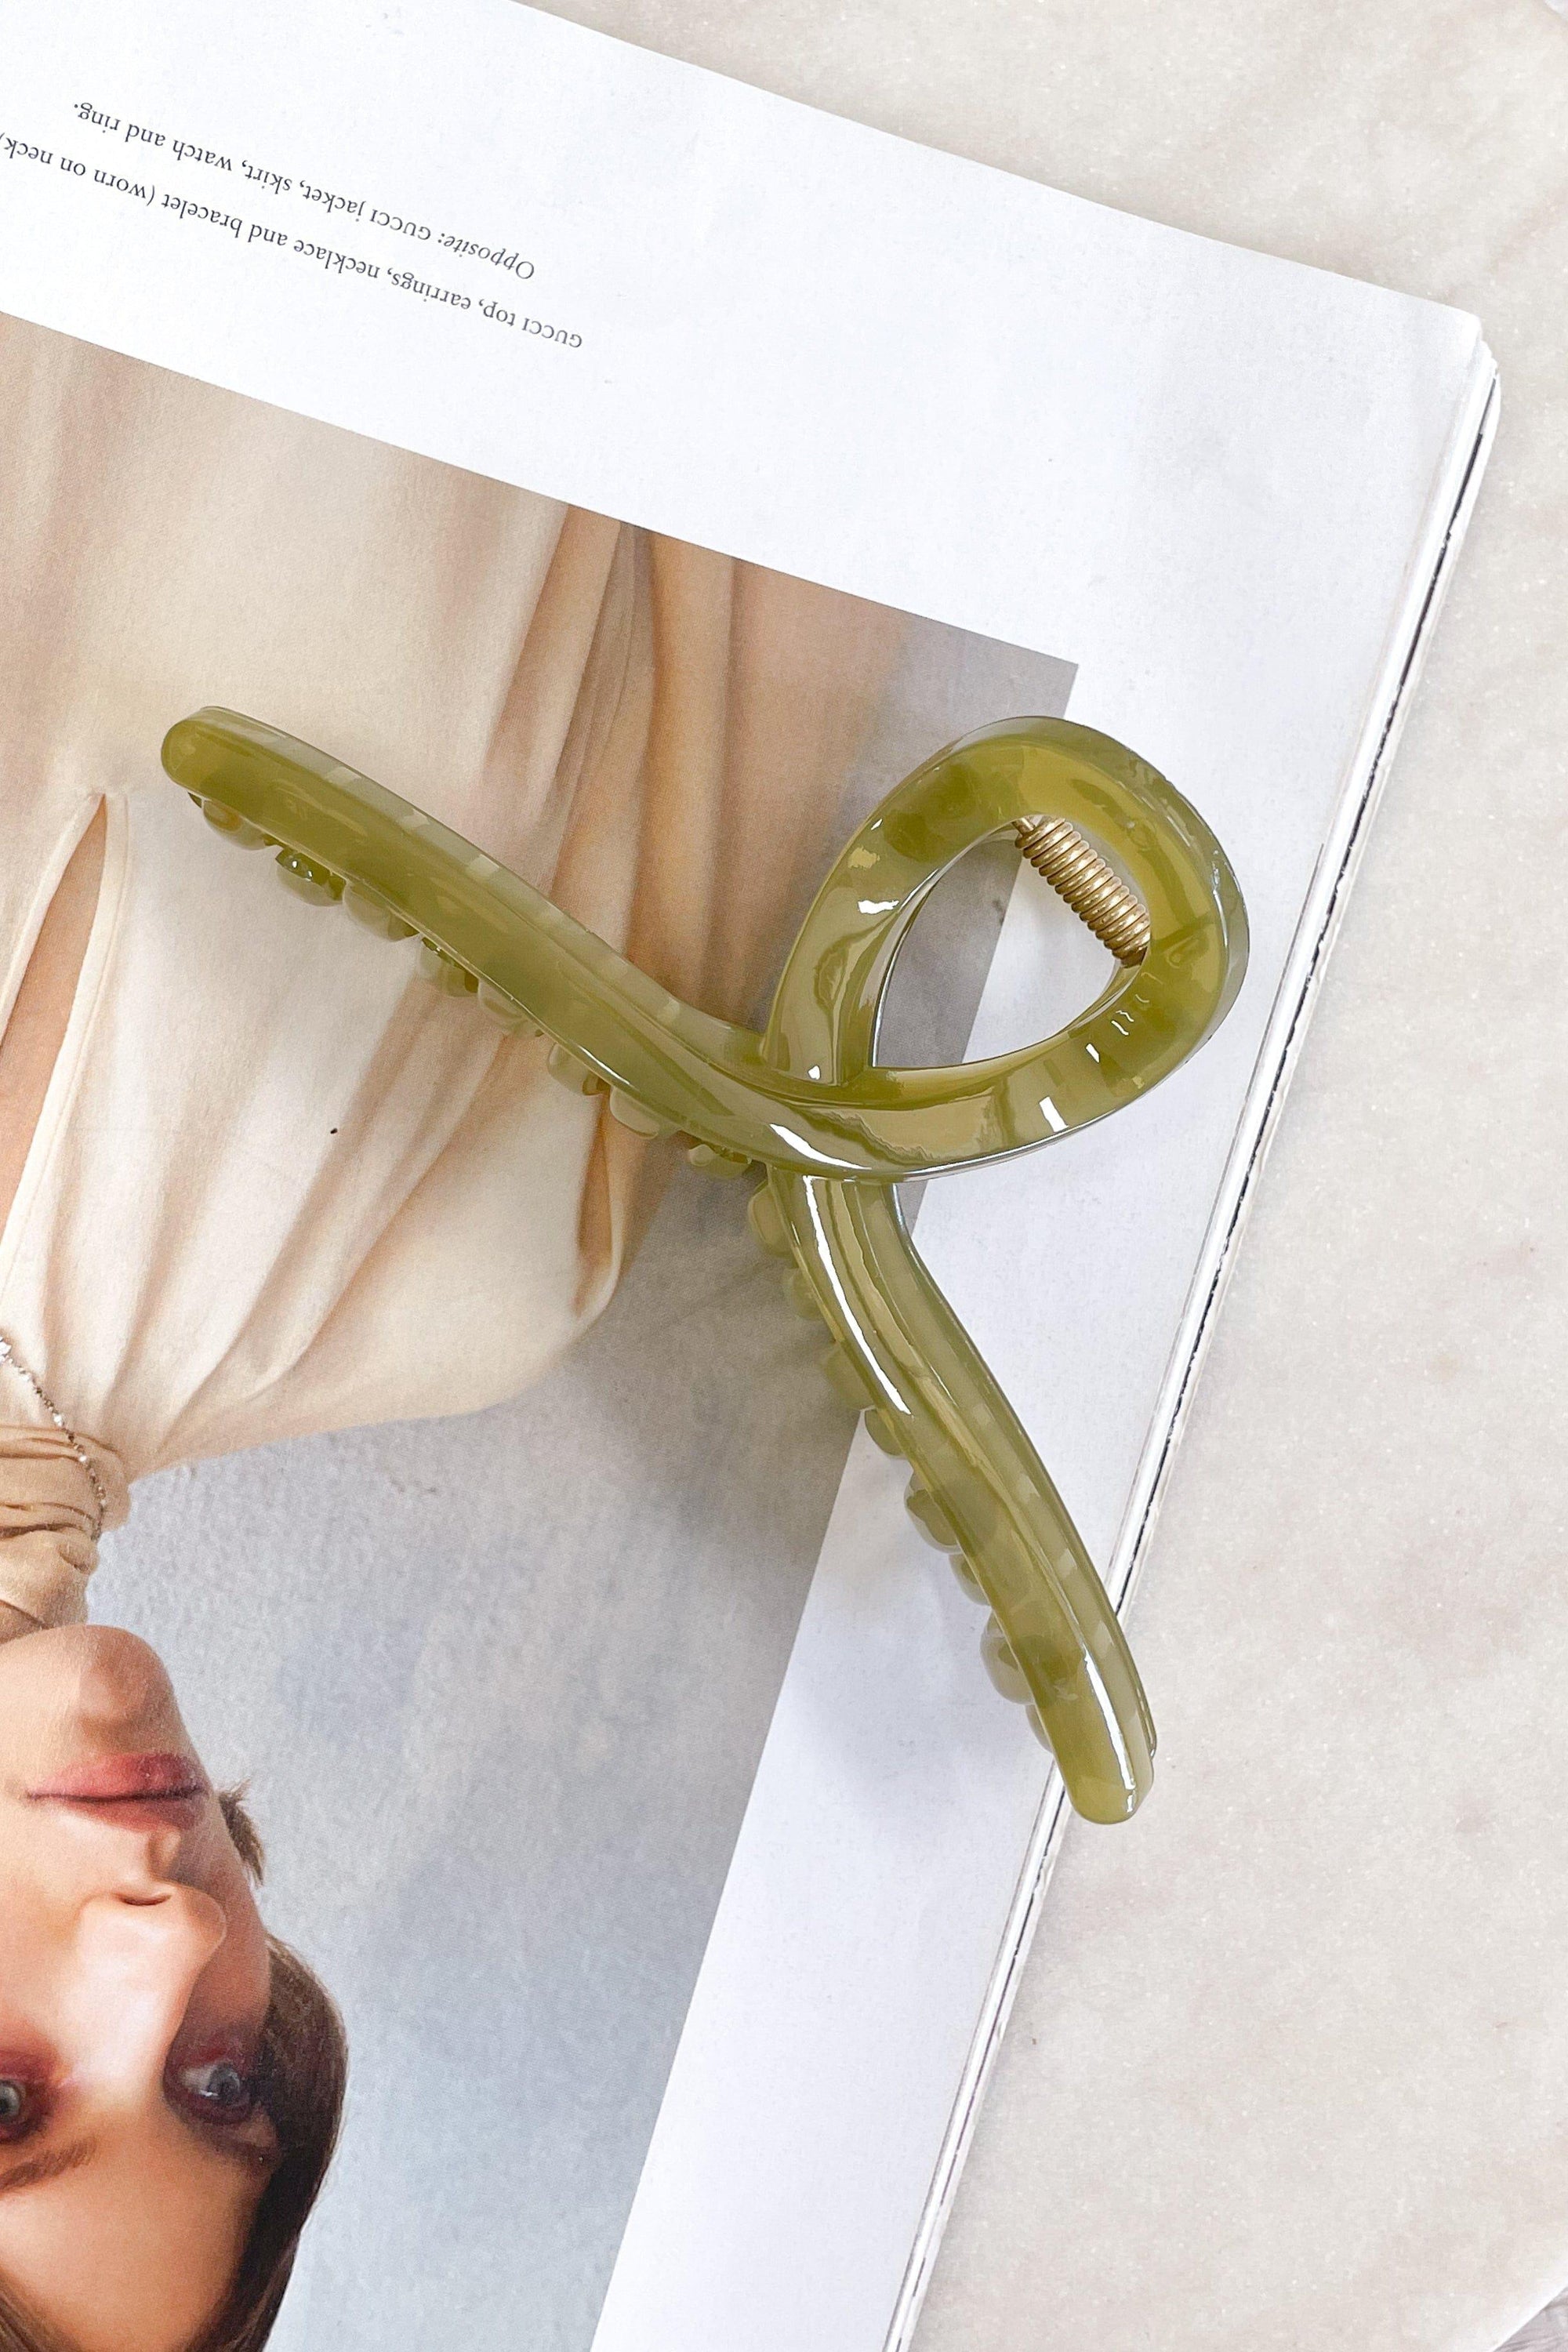 Neptune hair clip, , Our New Neptune hair clip Is Now Only $16.00 Exclusive At Mishkah, We Have The Latest Fashion Accessories @ Mishkah Online Fashion Boutique Our New Neptune hair clip is now only $16.00-MISHKAH